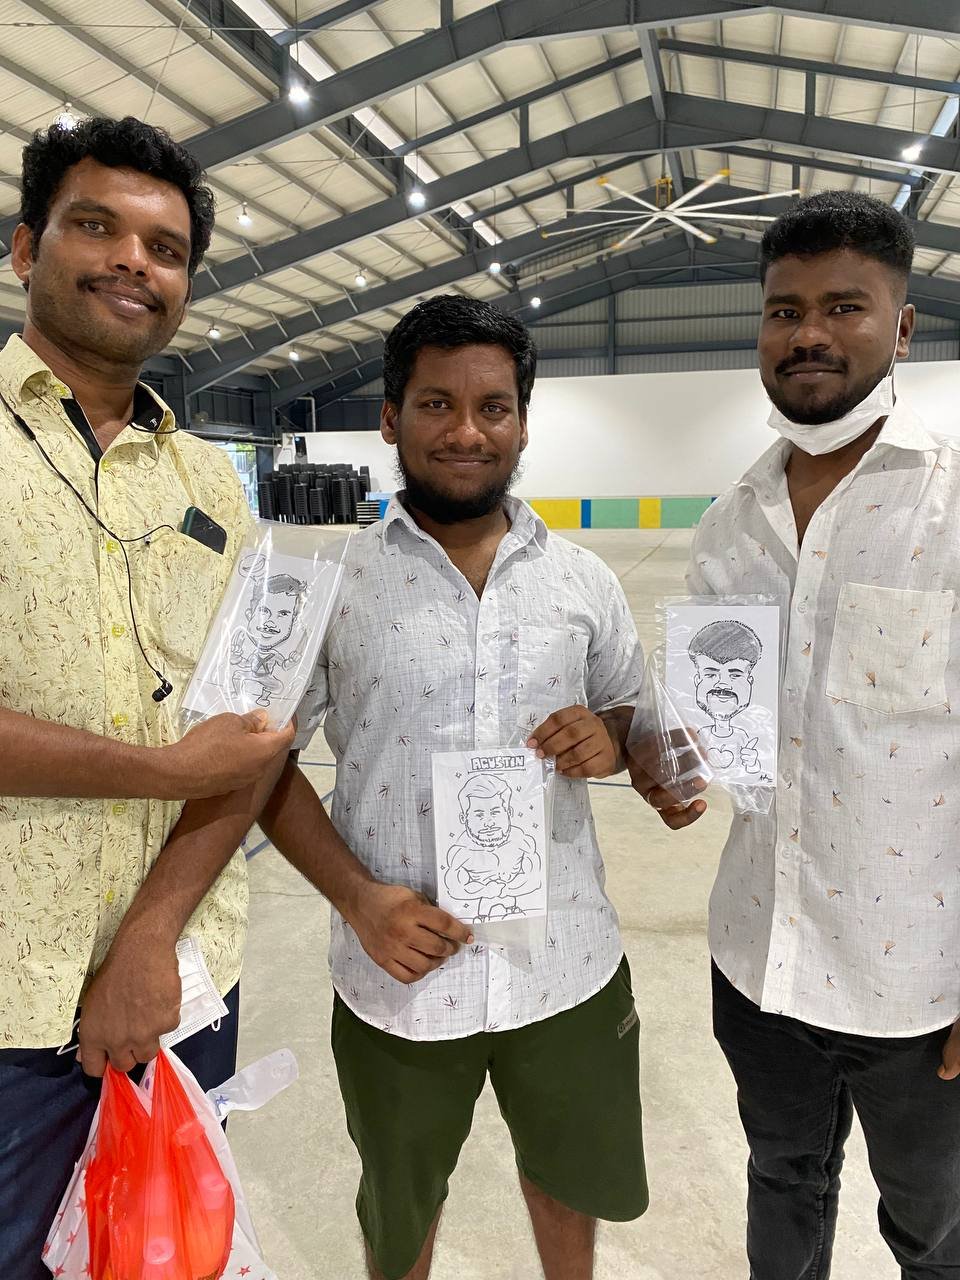 Migrant workers holding caricature drawings at Cochrane RC 5.jpeg